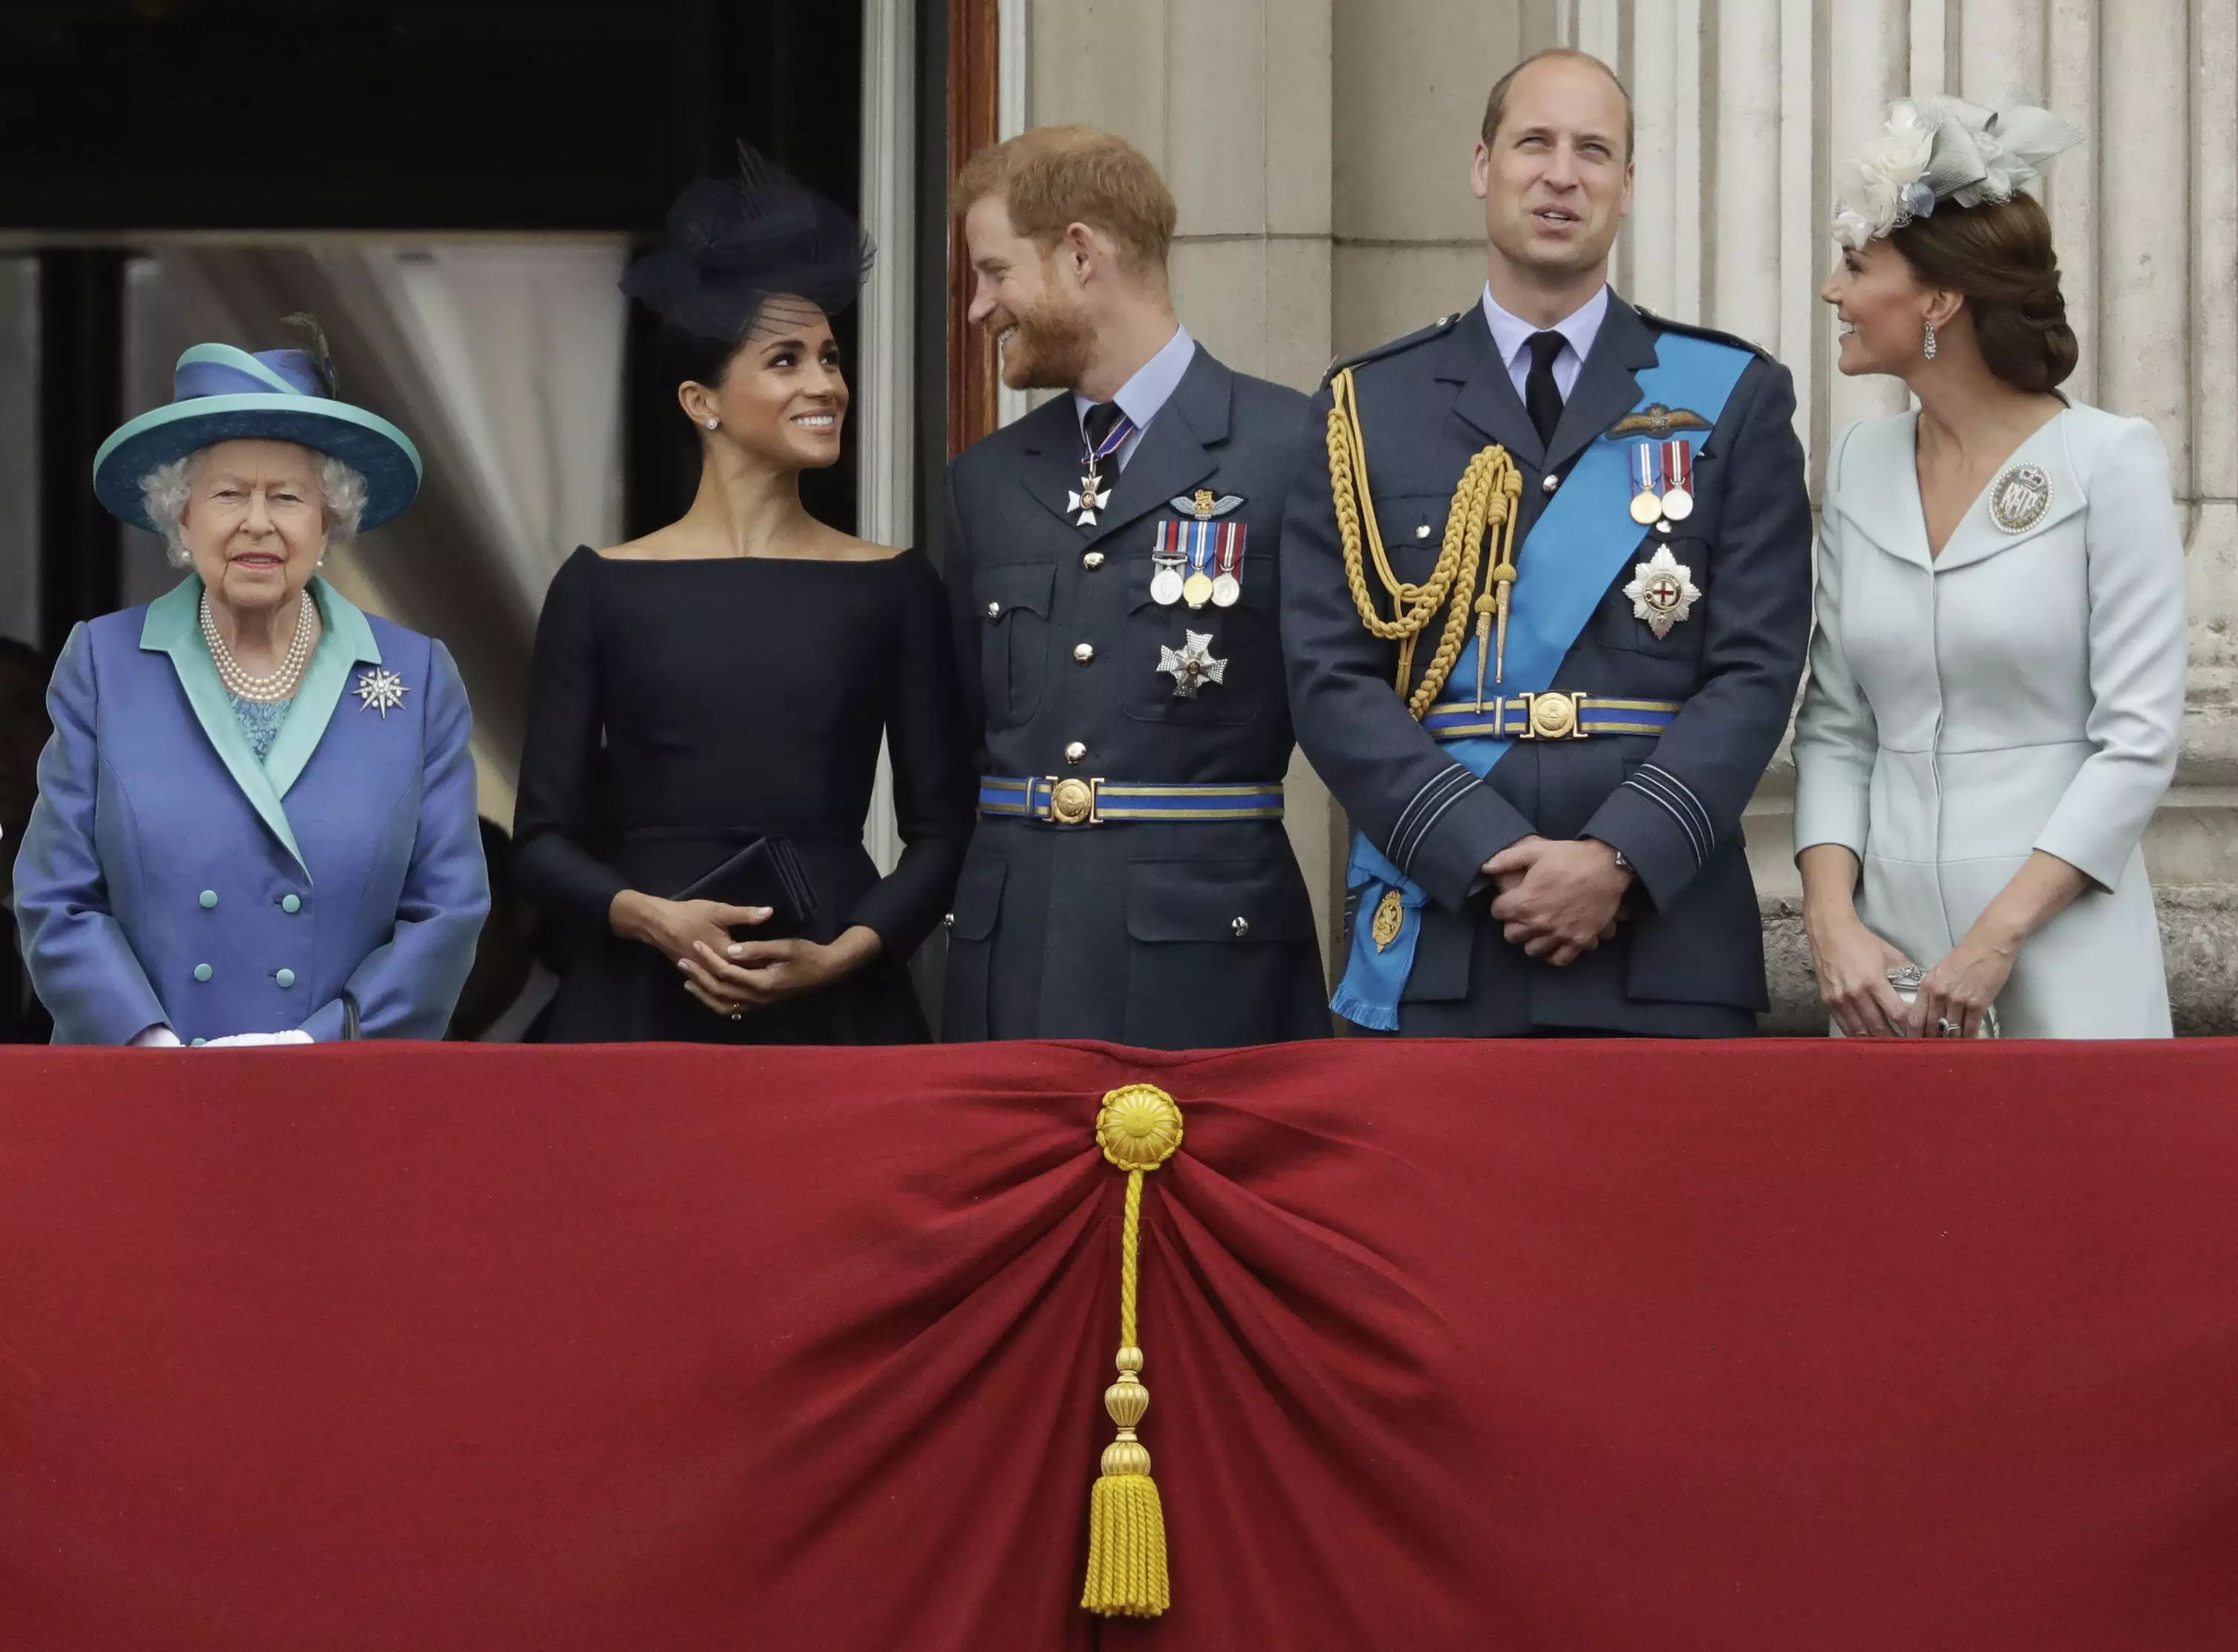 Queen Elizabeth II, and from left, Meghan the Duchess of Sussex, Prince Harry, Prince William and Kate the Duchess of Cambridge.